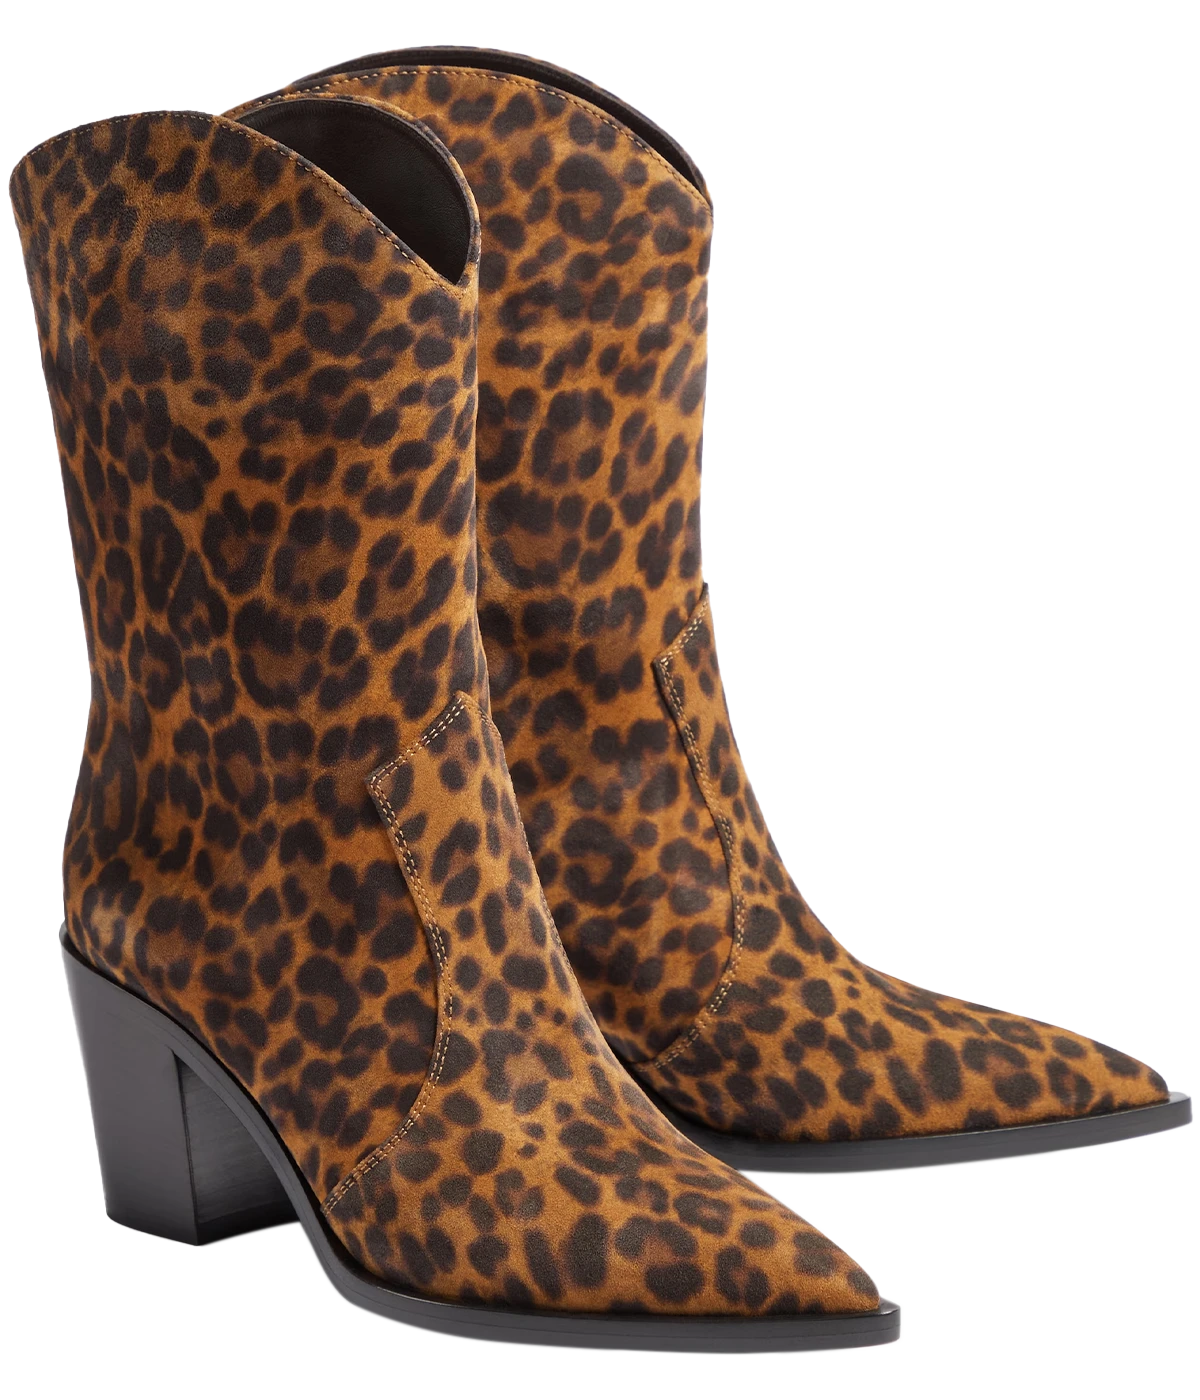 A comfortable 8cm heel with an elegant pointed toe. Stylish leopard print suede outer. Wear this refined cowboy boot all year to dress up any outfit.